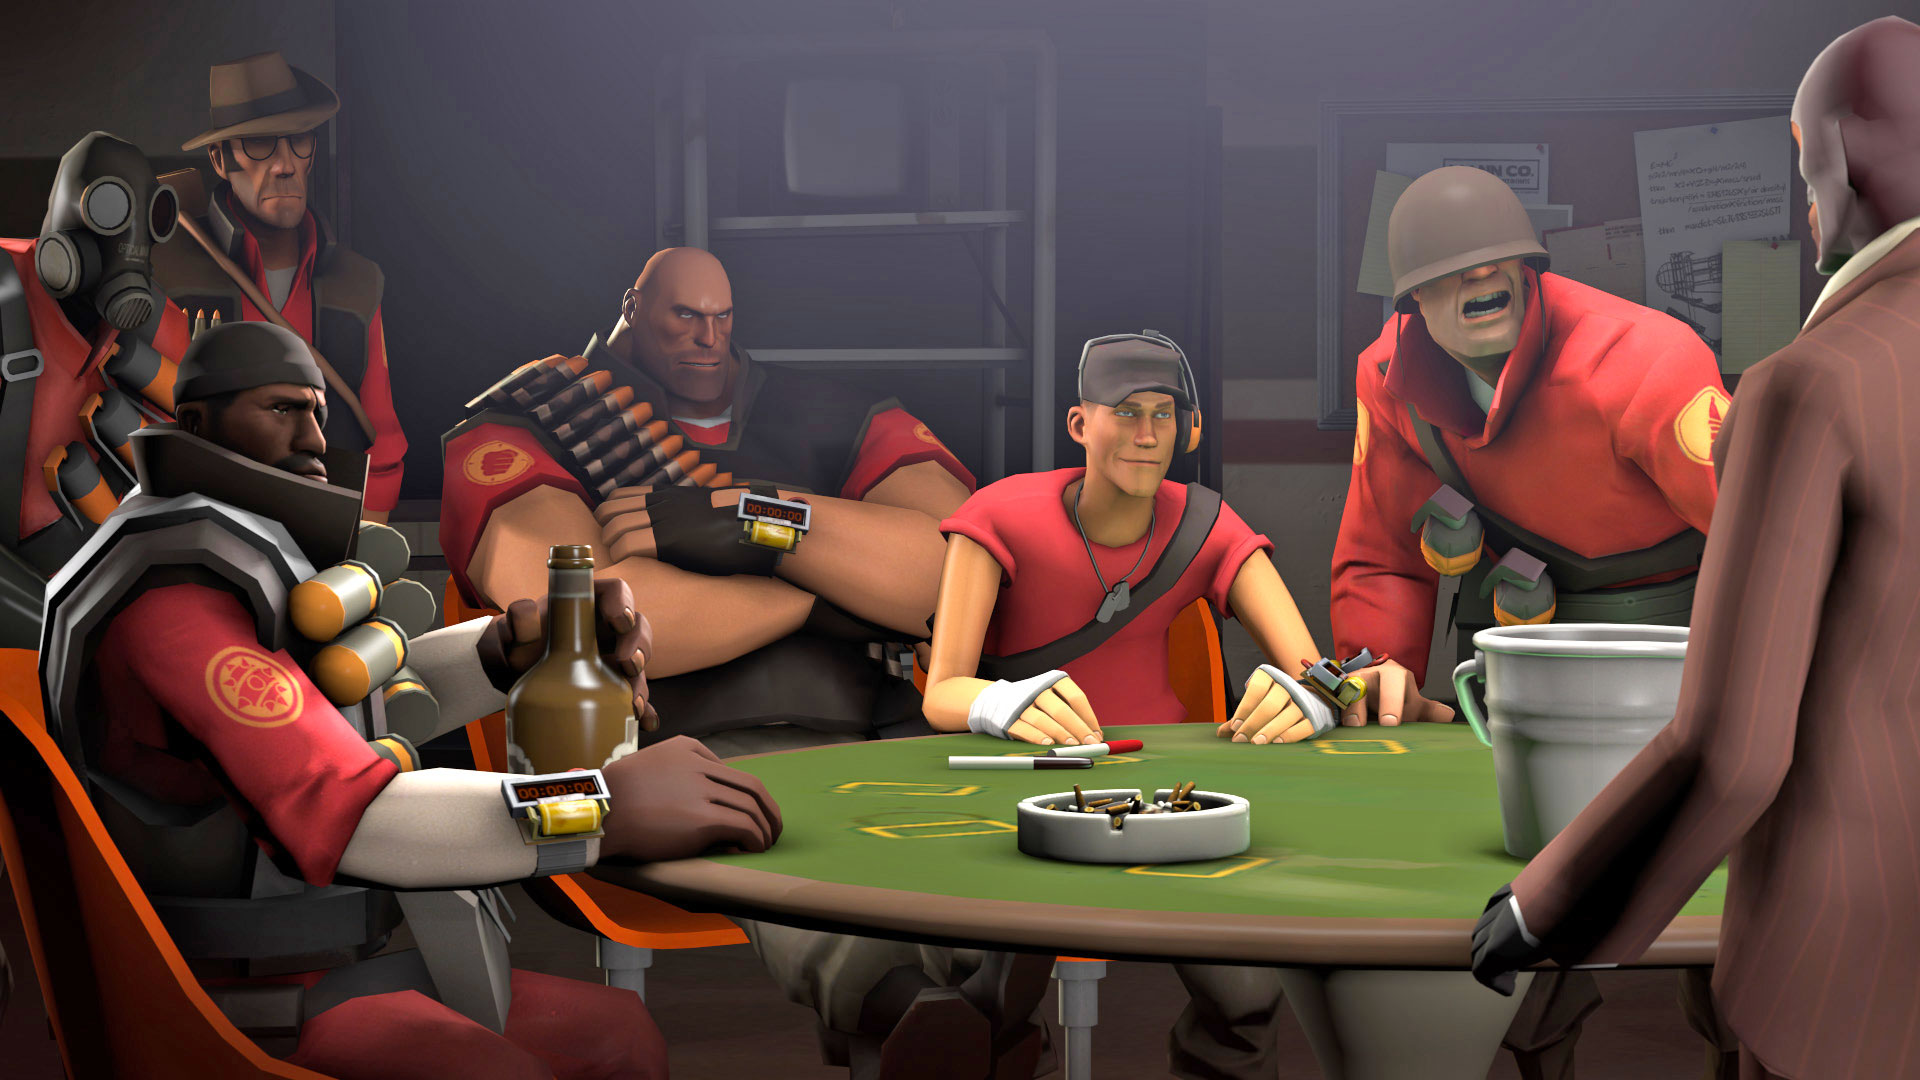 1920x1080 > Team Fortress 2 Wallpapers